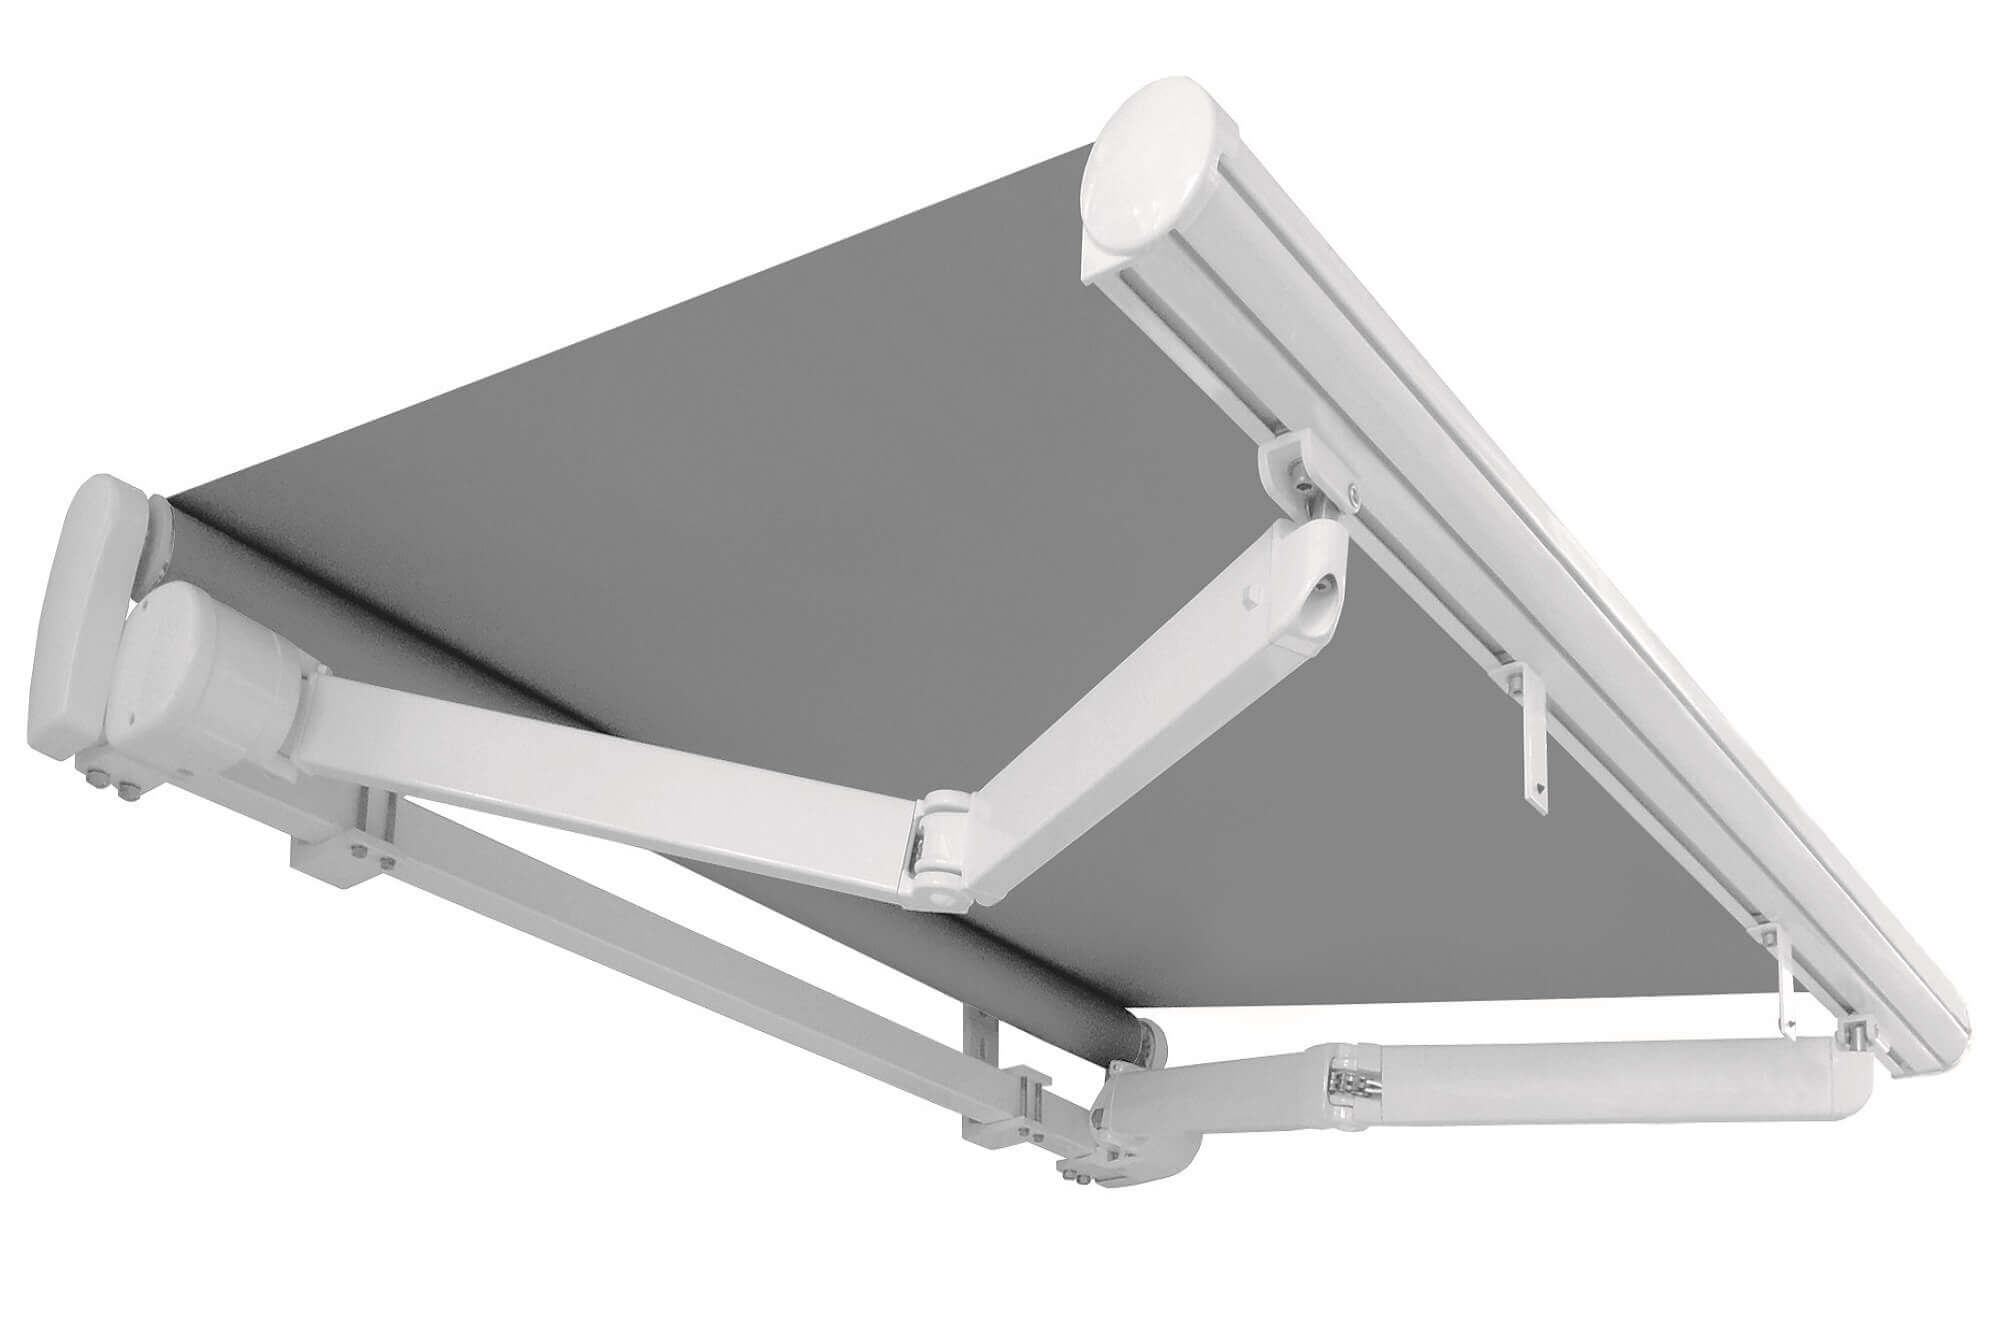 Roma folding lateral arm retractable awning partially extended